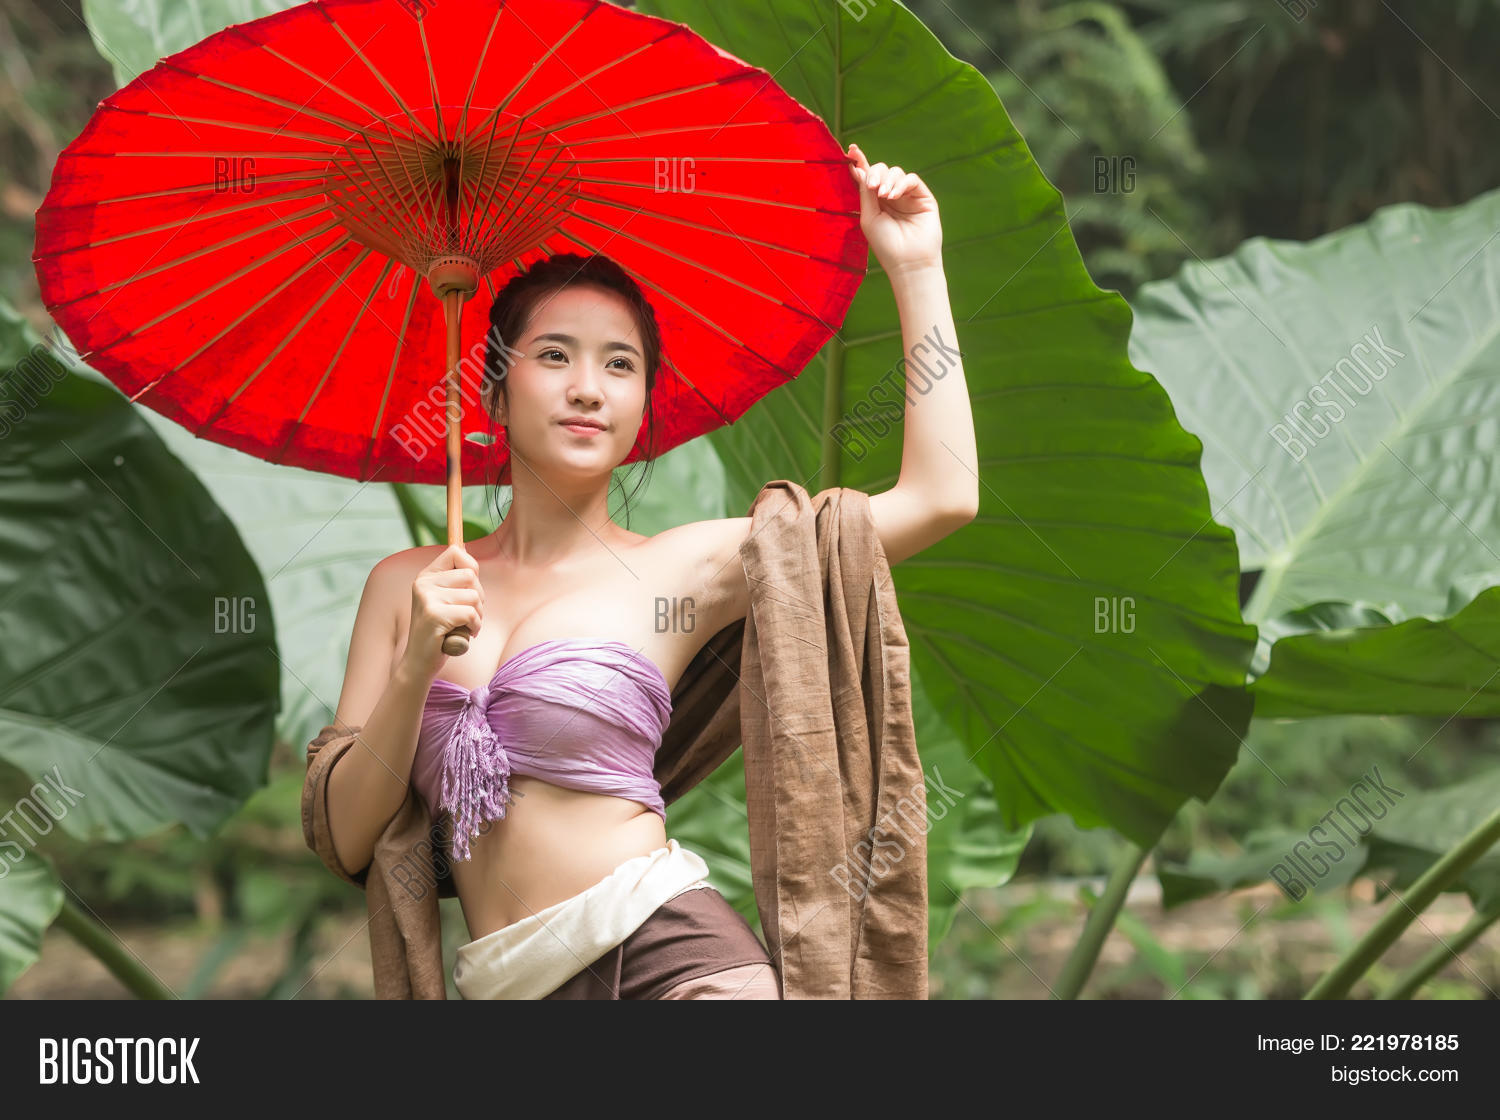 Free picture of thai girls